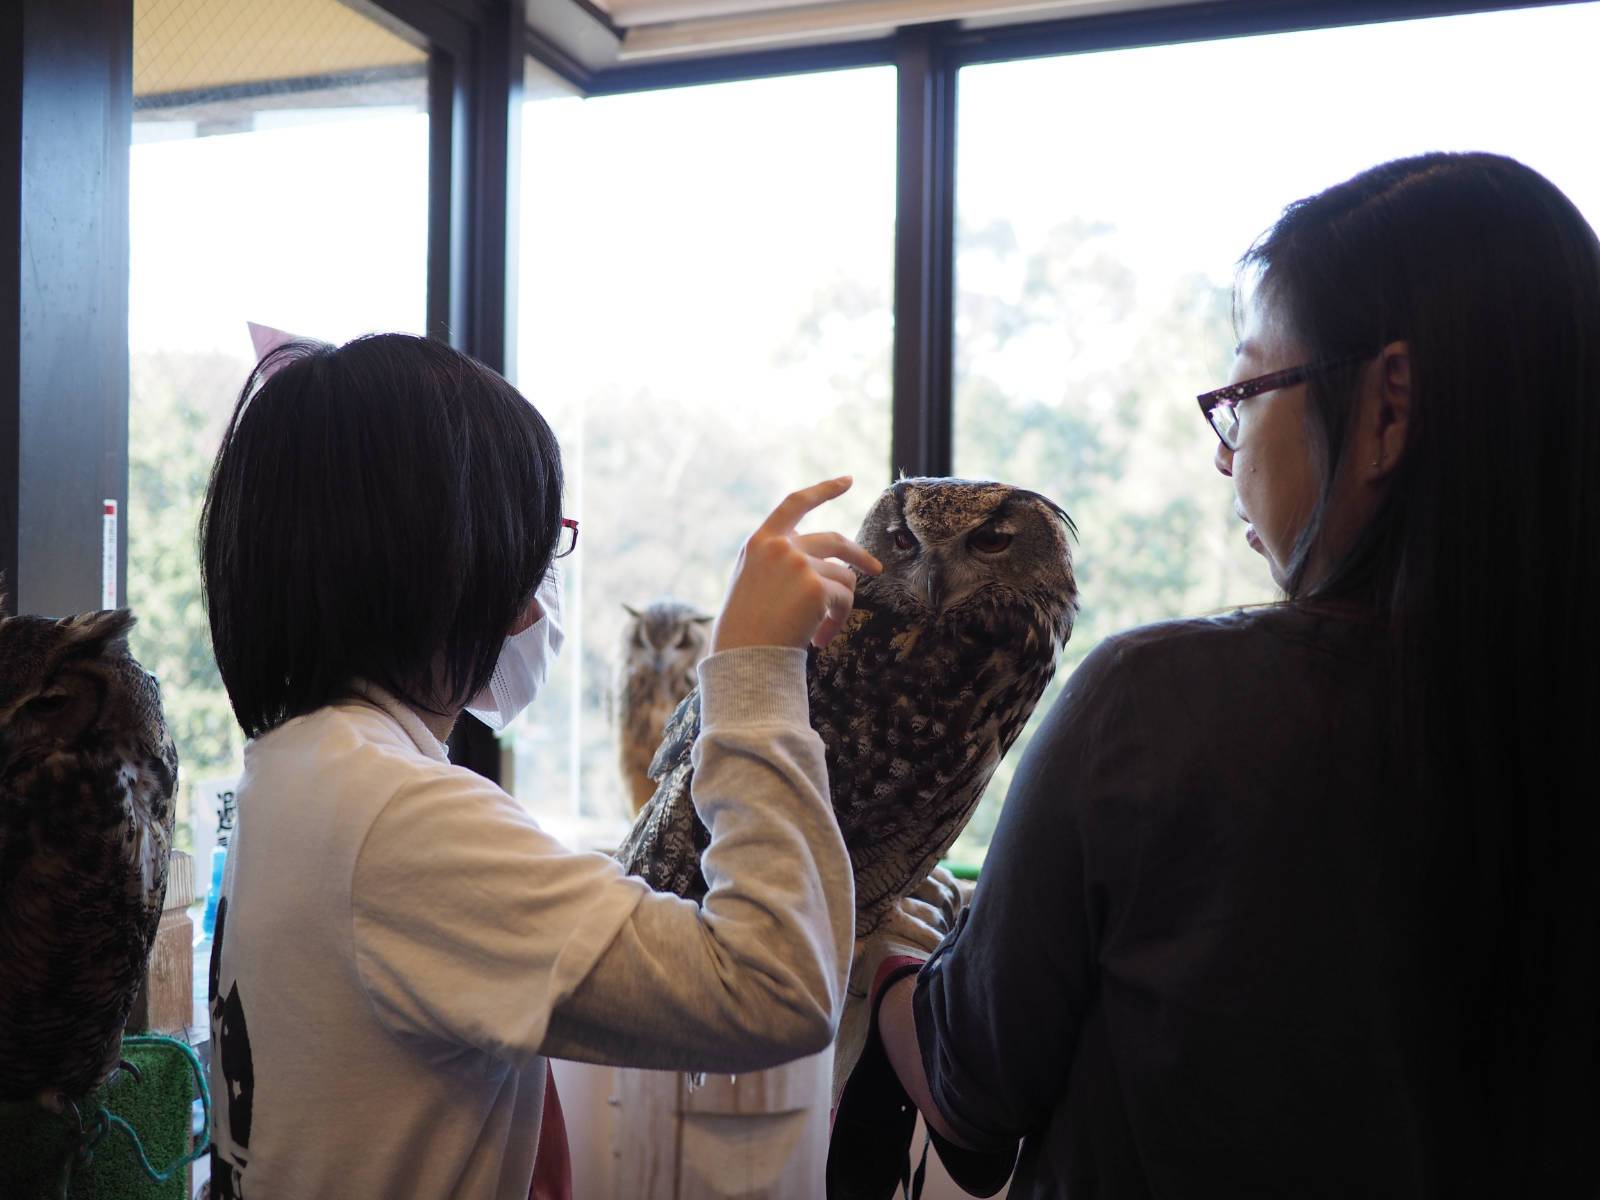 Staff telling visitors about an Owl